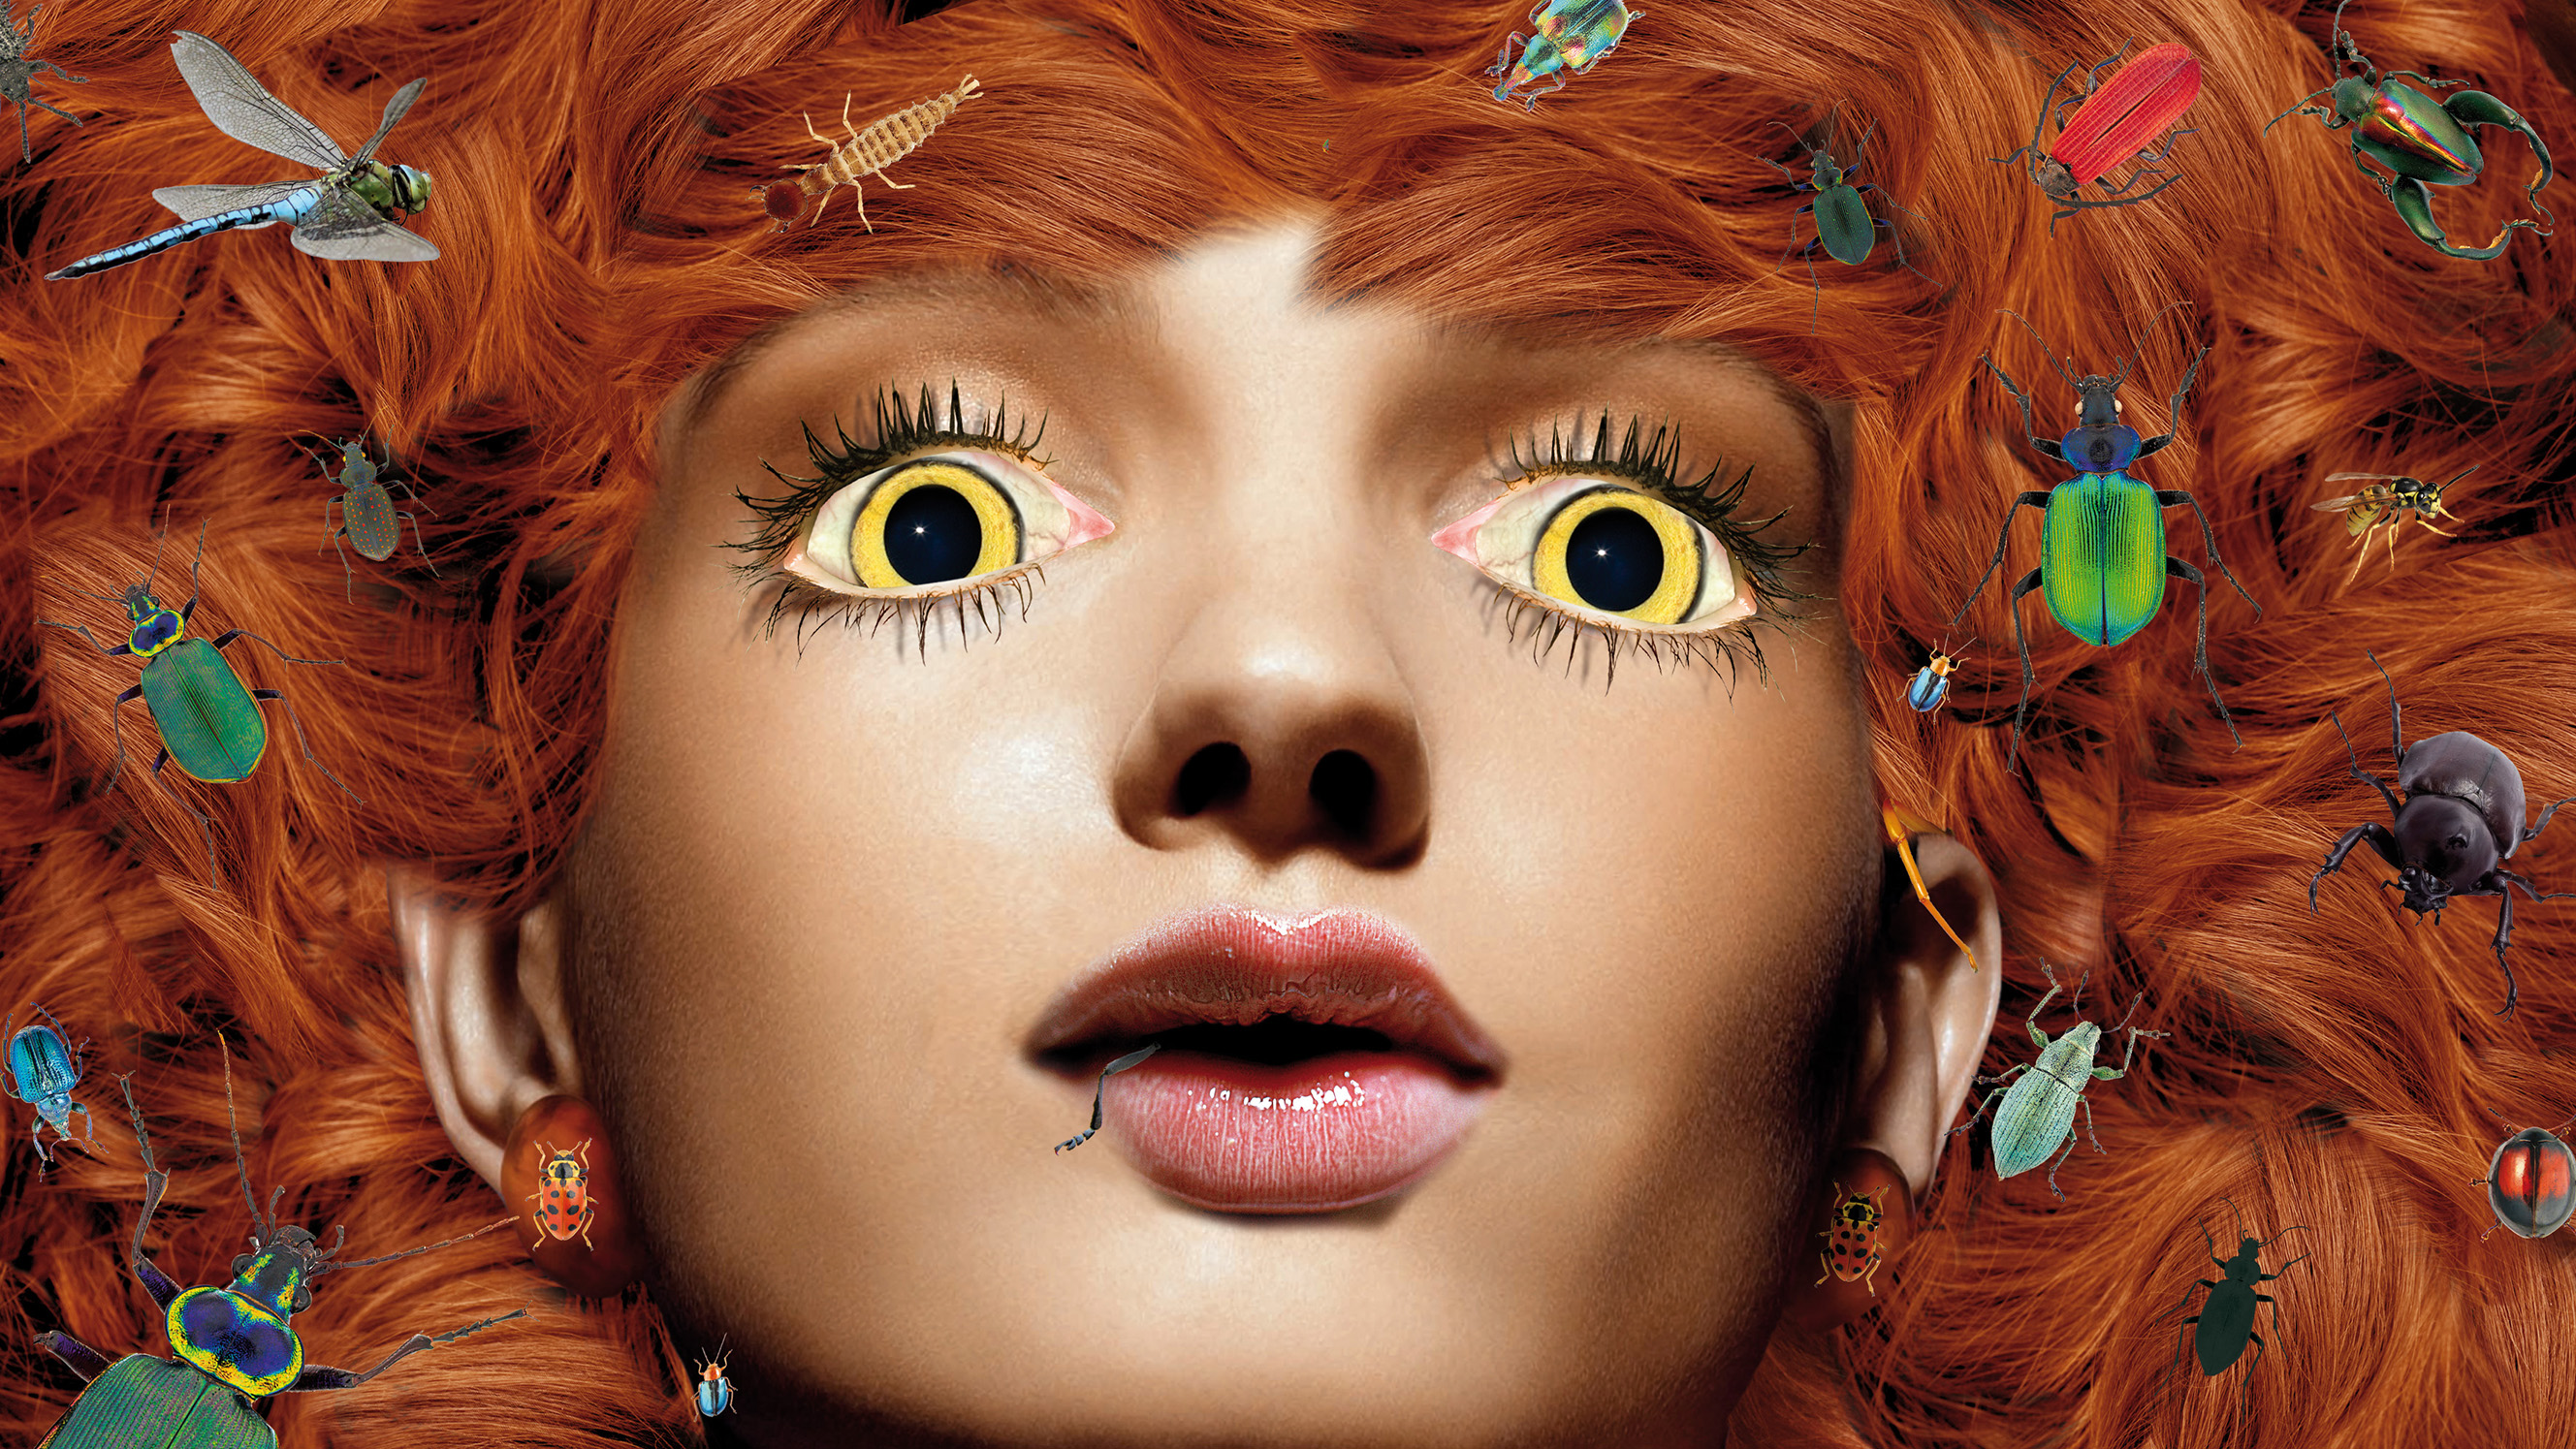 Still from digital animation by artist Debora Kelly of a female face with red hair covered in insects.